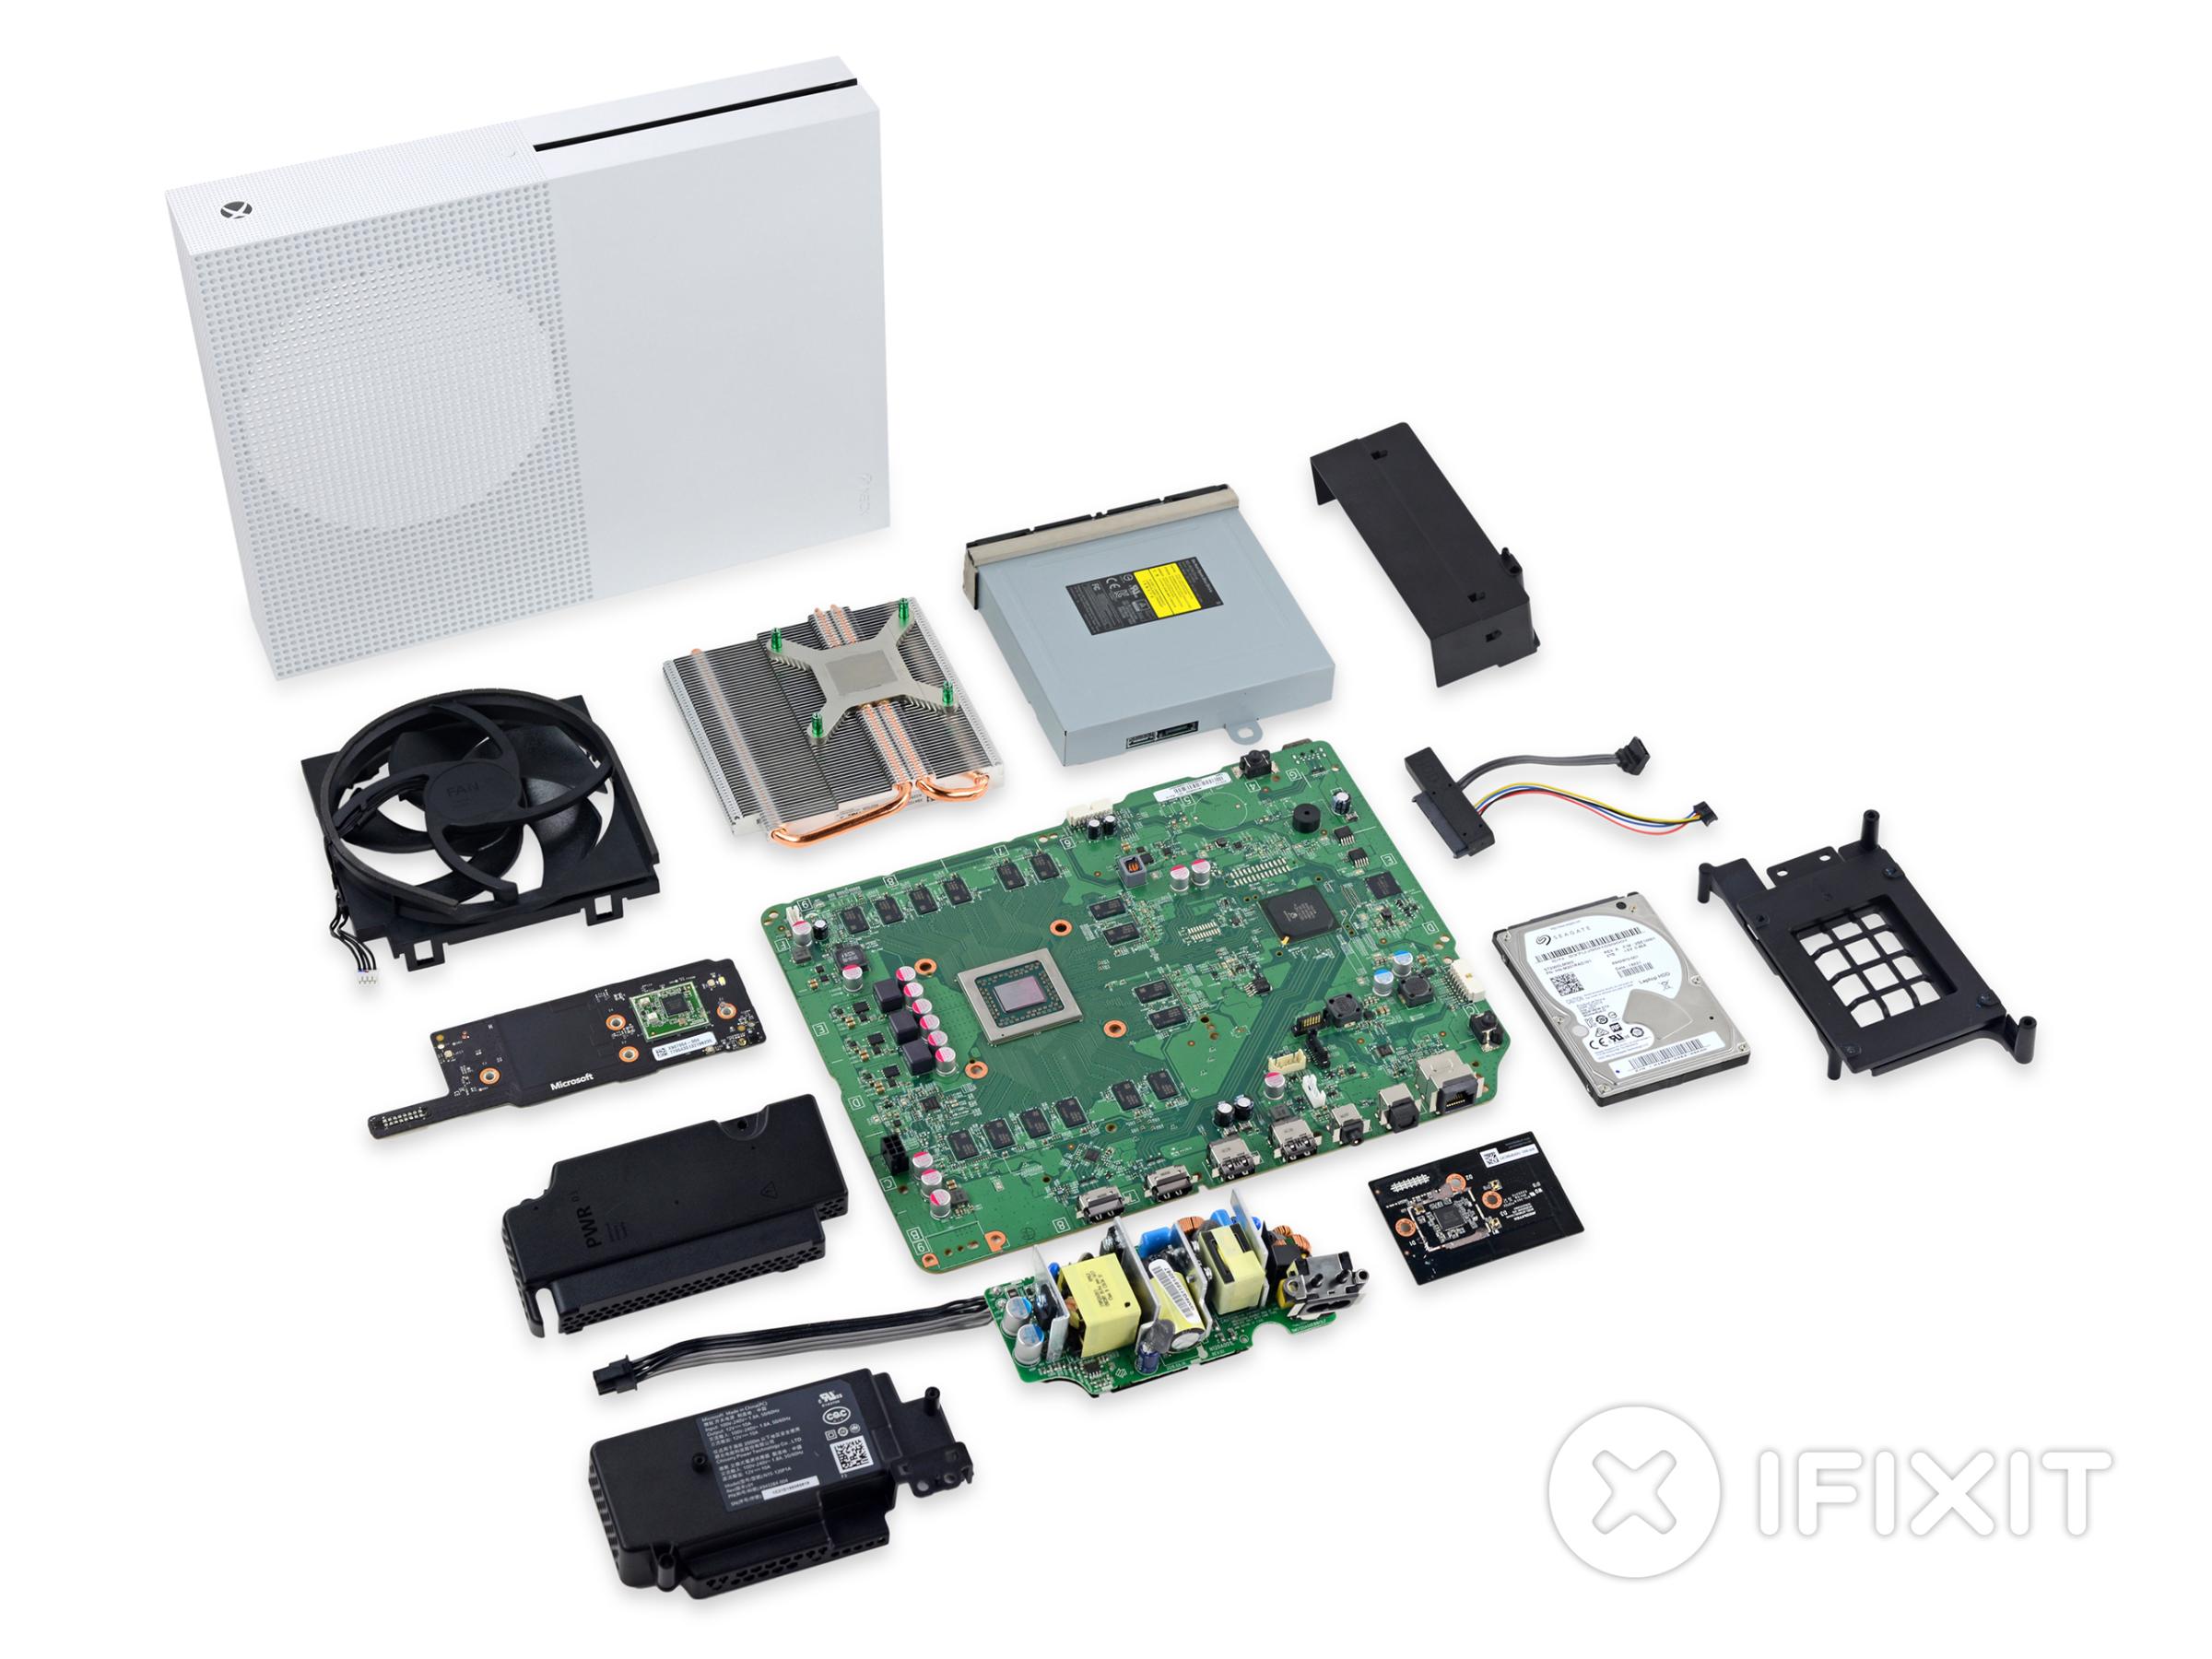 The Xbox One S entirely dismantled.